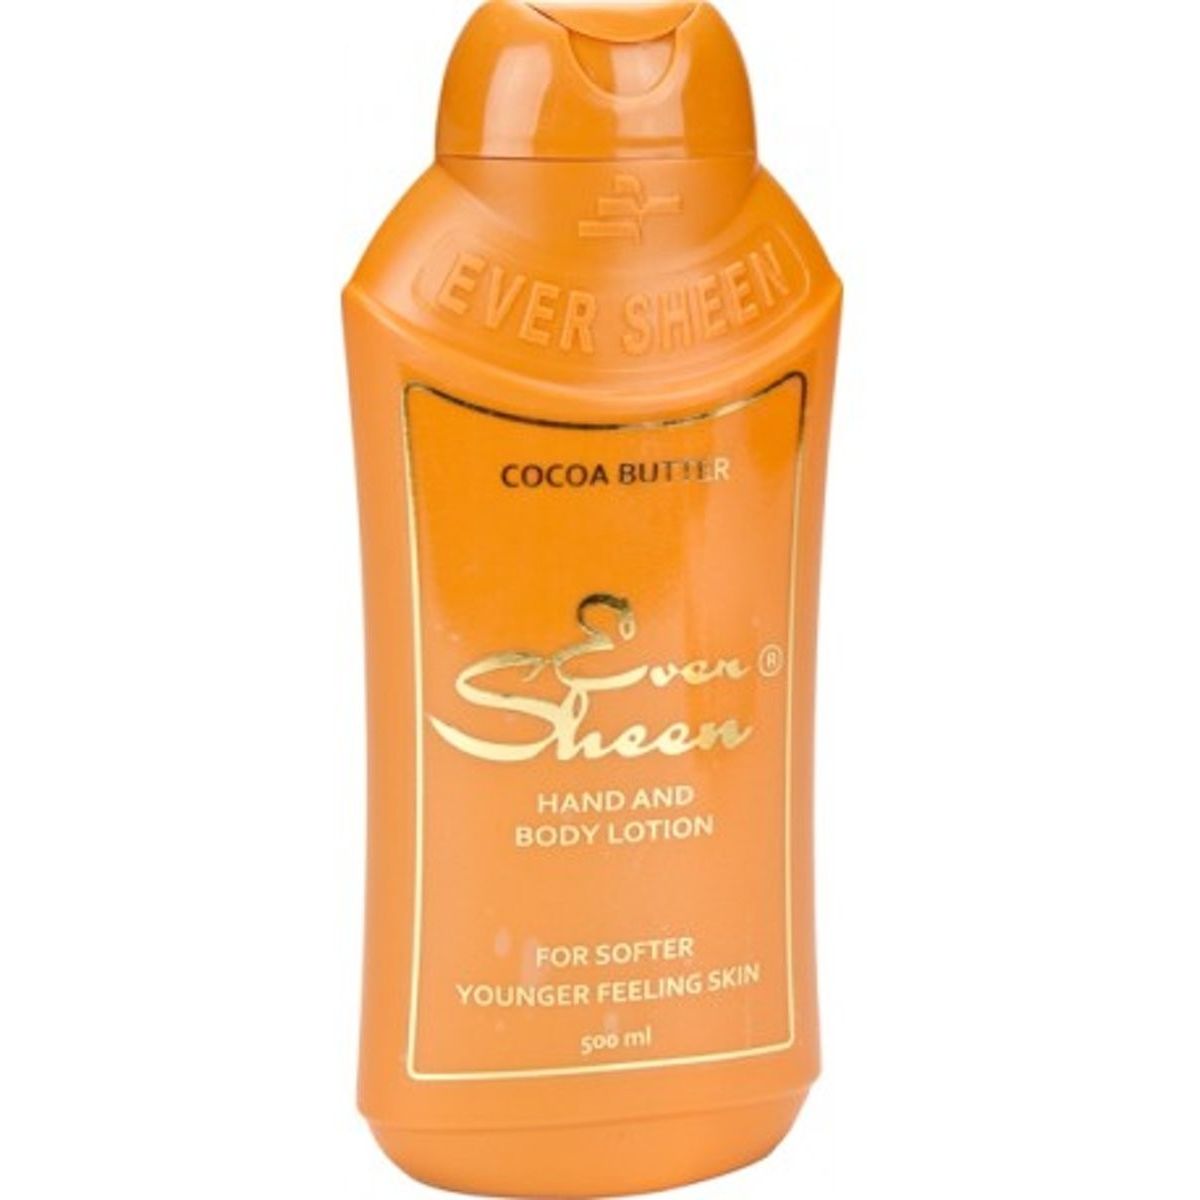 Ever Sheen Cocoa Butter Hand & Body Lotion 500 ml